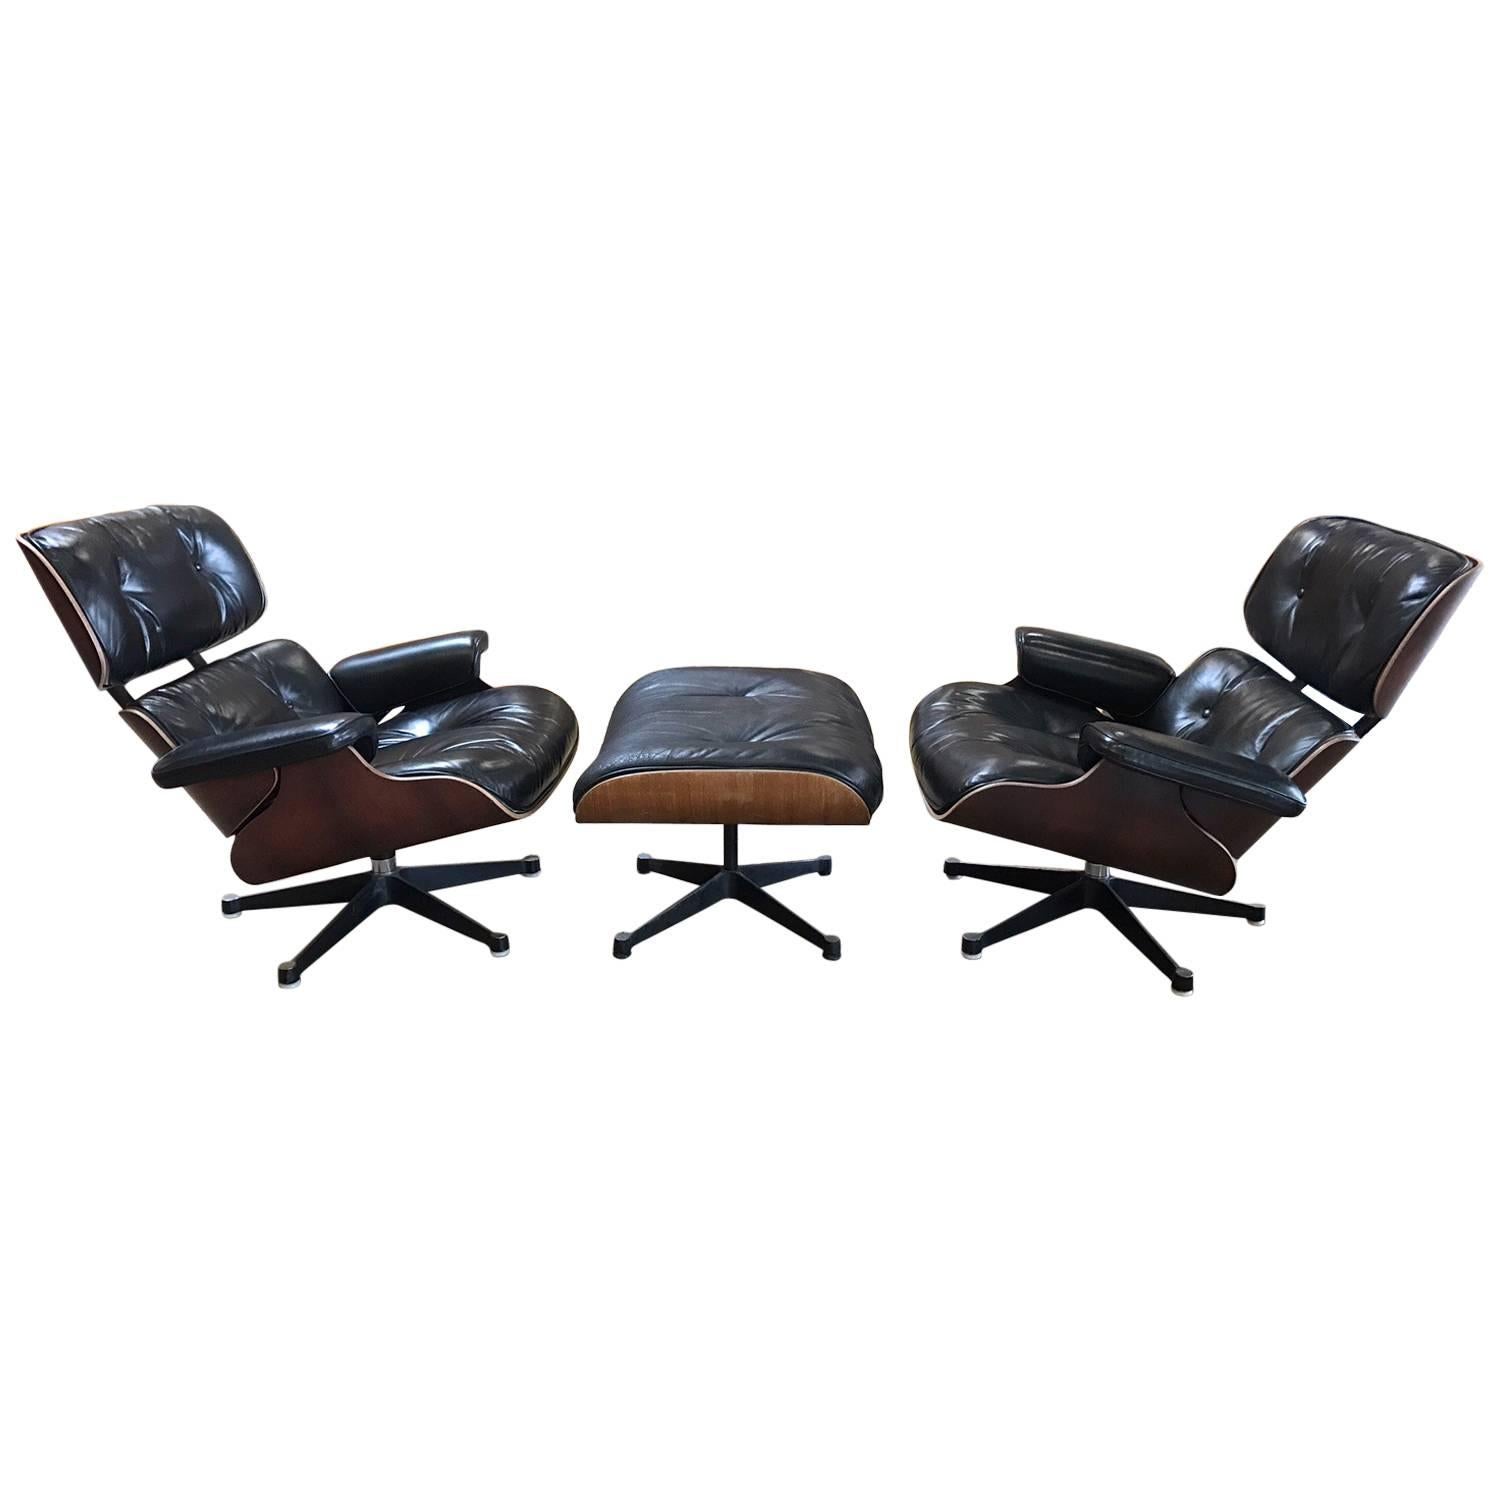 Fantastic Pair of Charles Eames Lounge Chair and Ottoman Hermann Miller